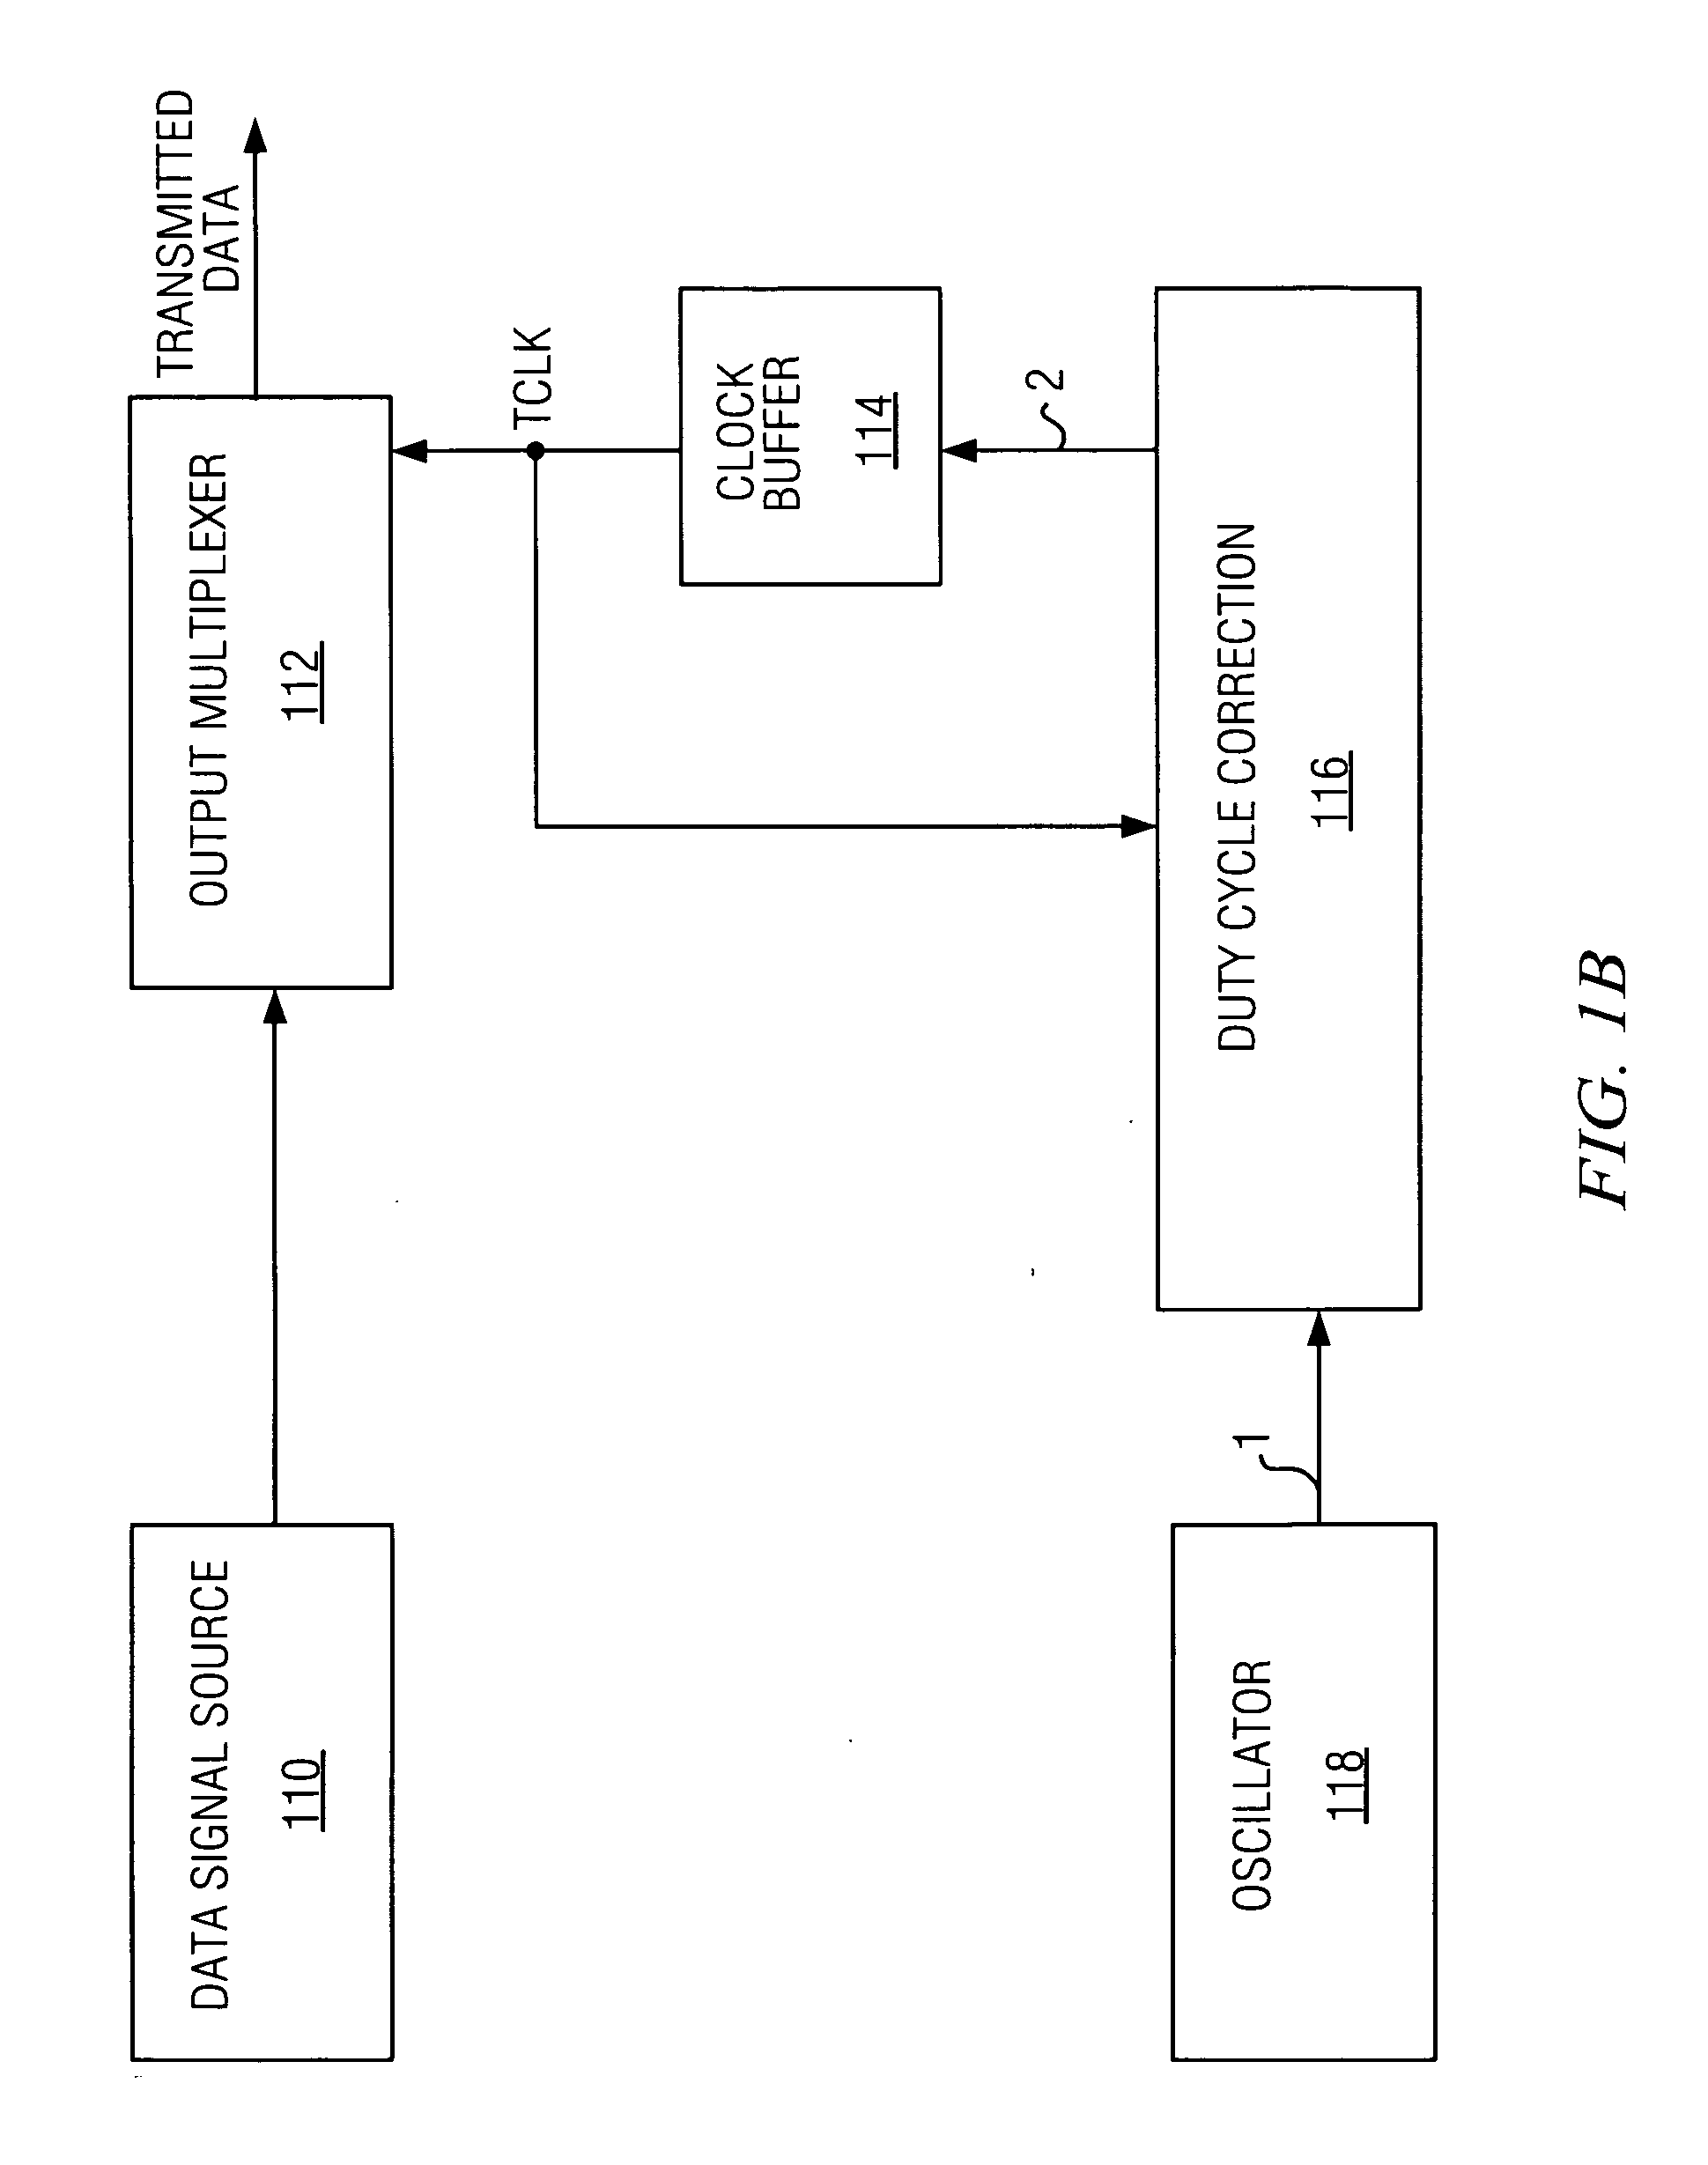 Systems and methods of performing duty cycle control